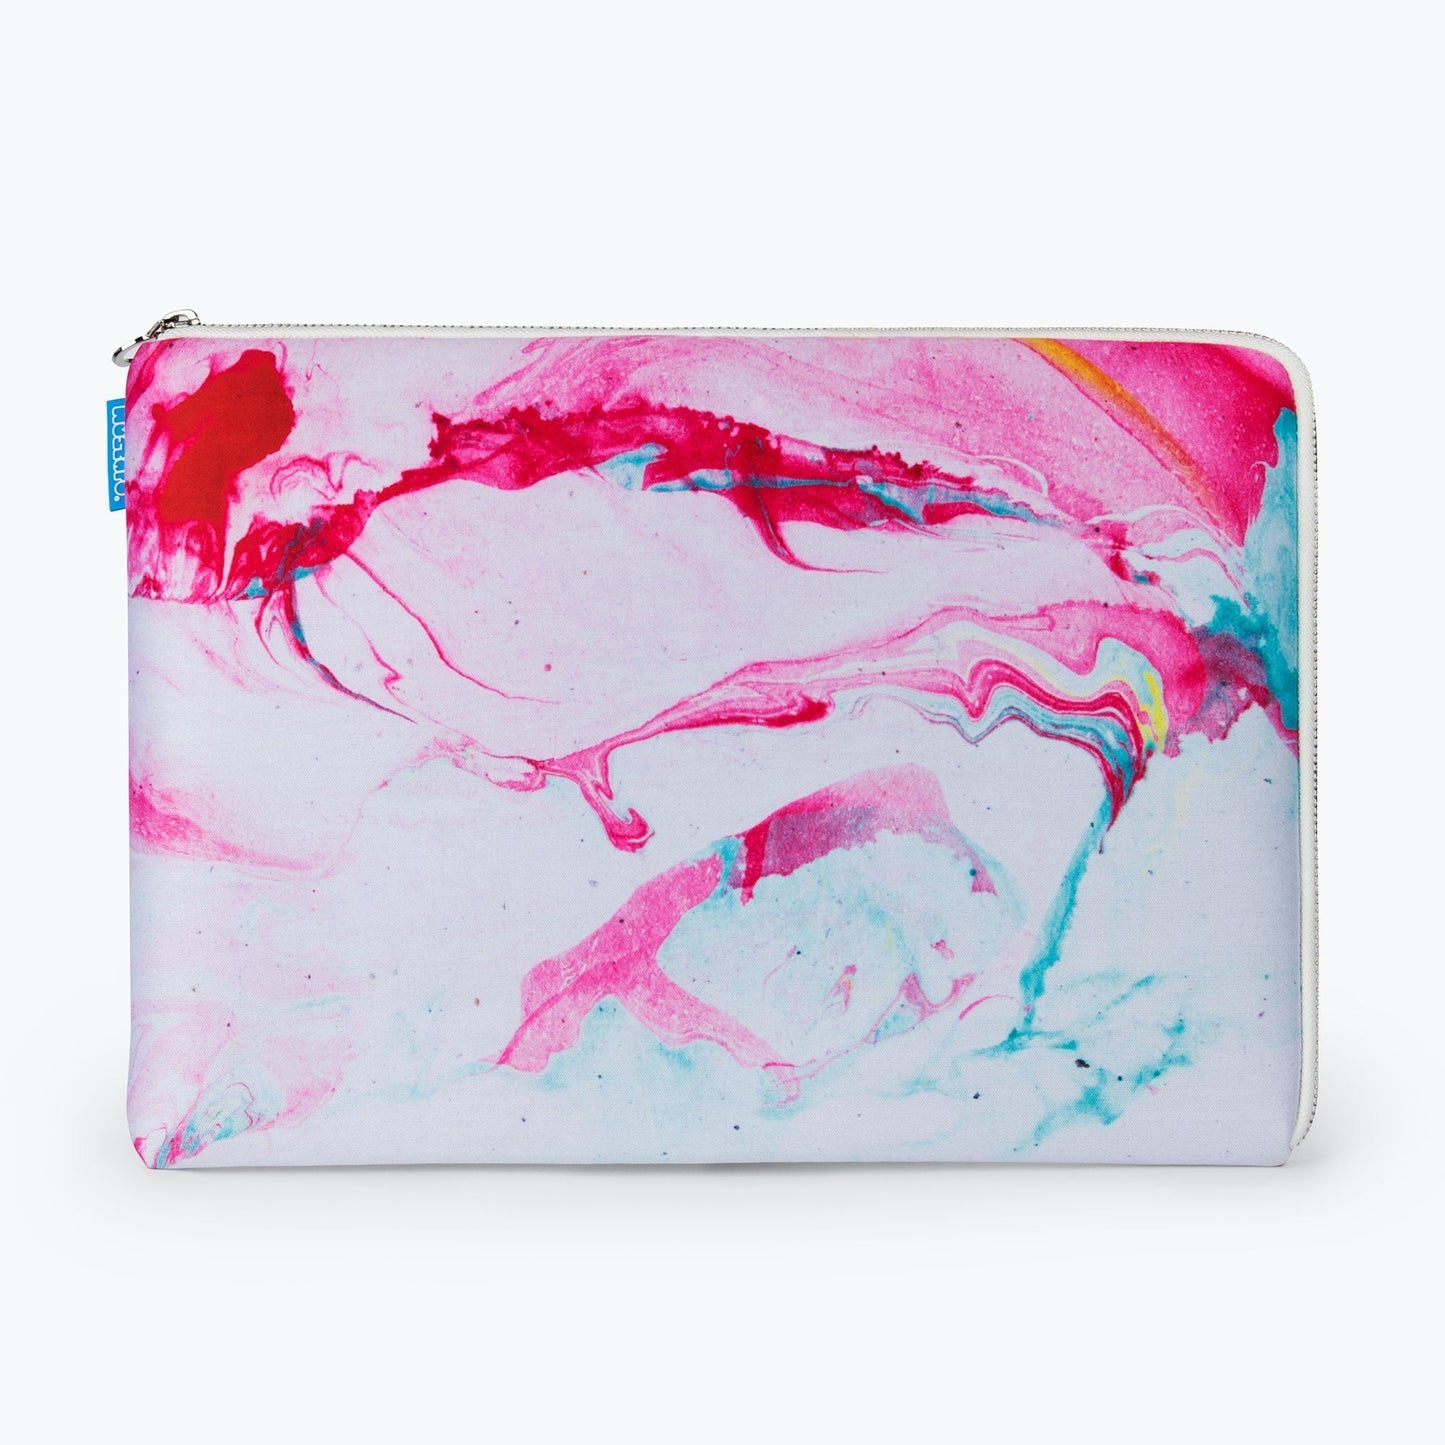 Marble Laptop Sleeve Case | Compatible With 13" and Some 14" Laptops